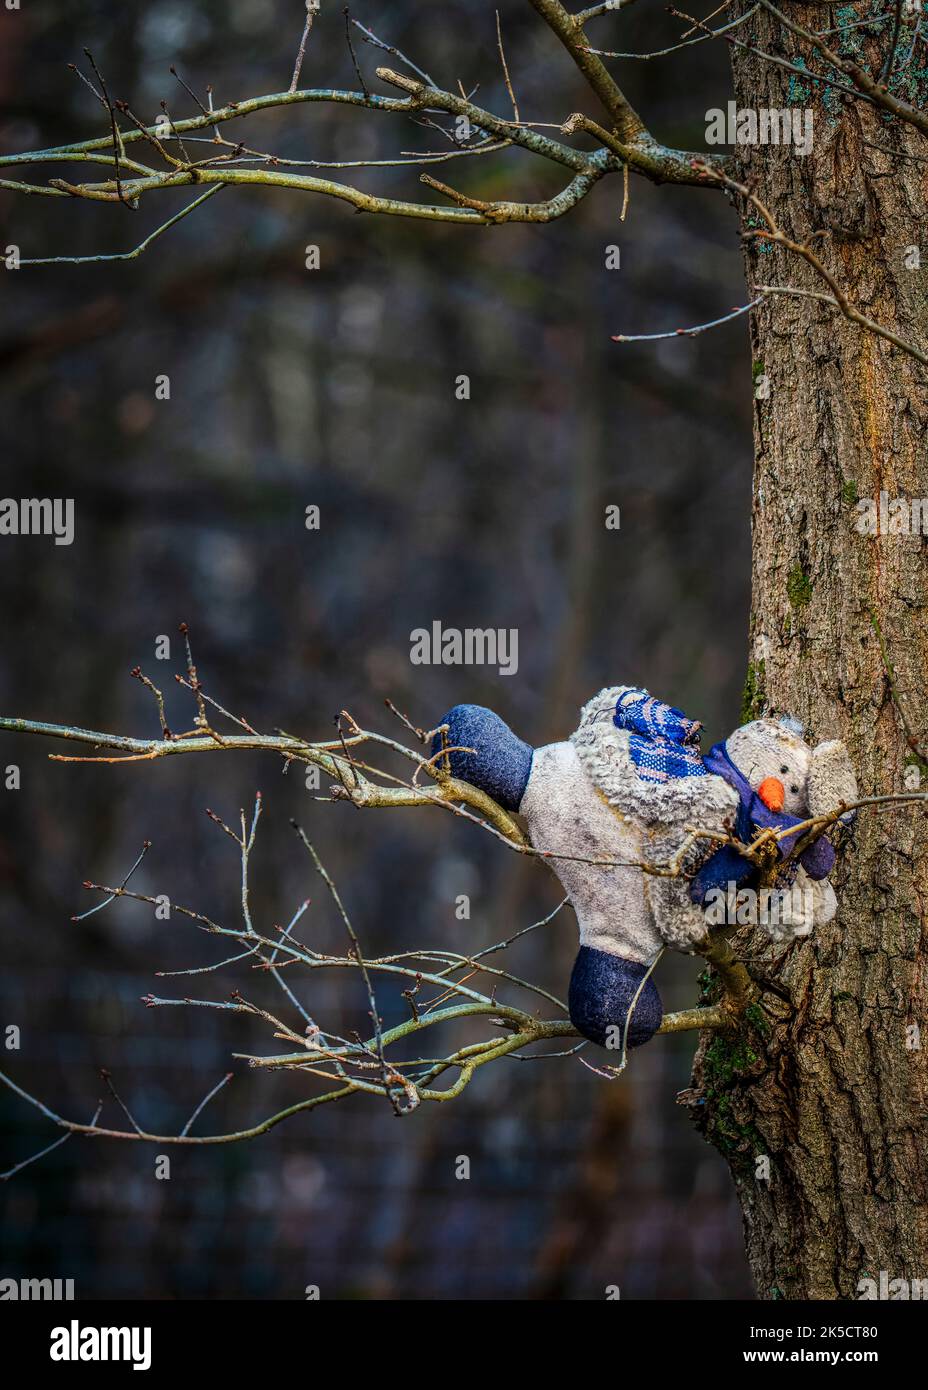 Toy on a tree in the forest Stock Photo